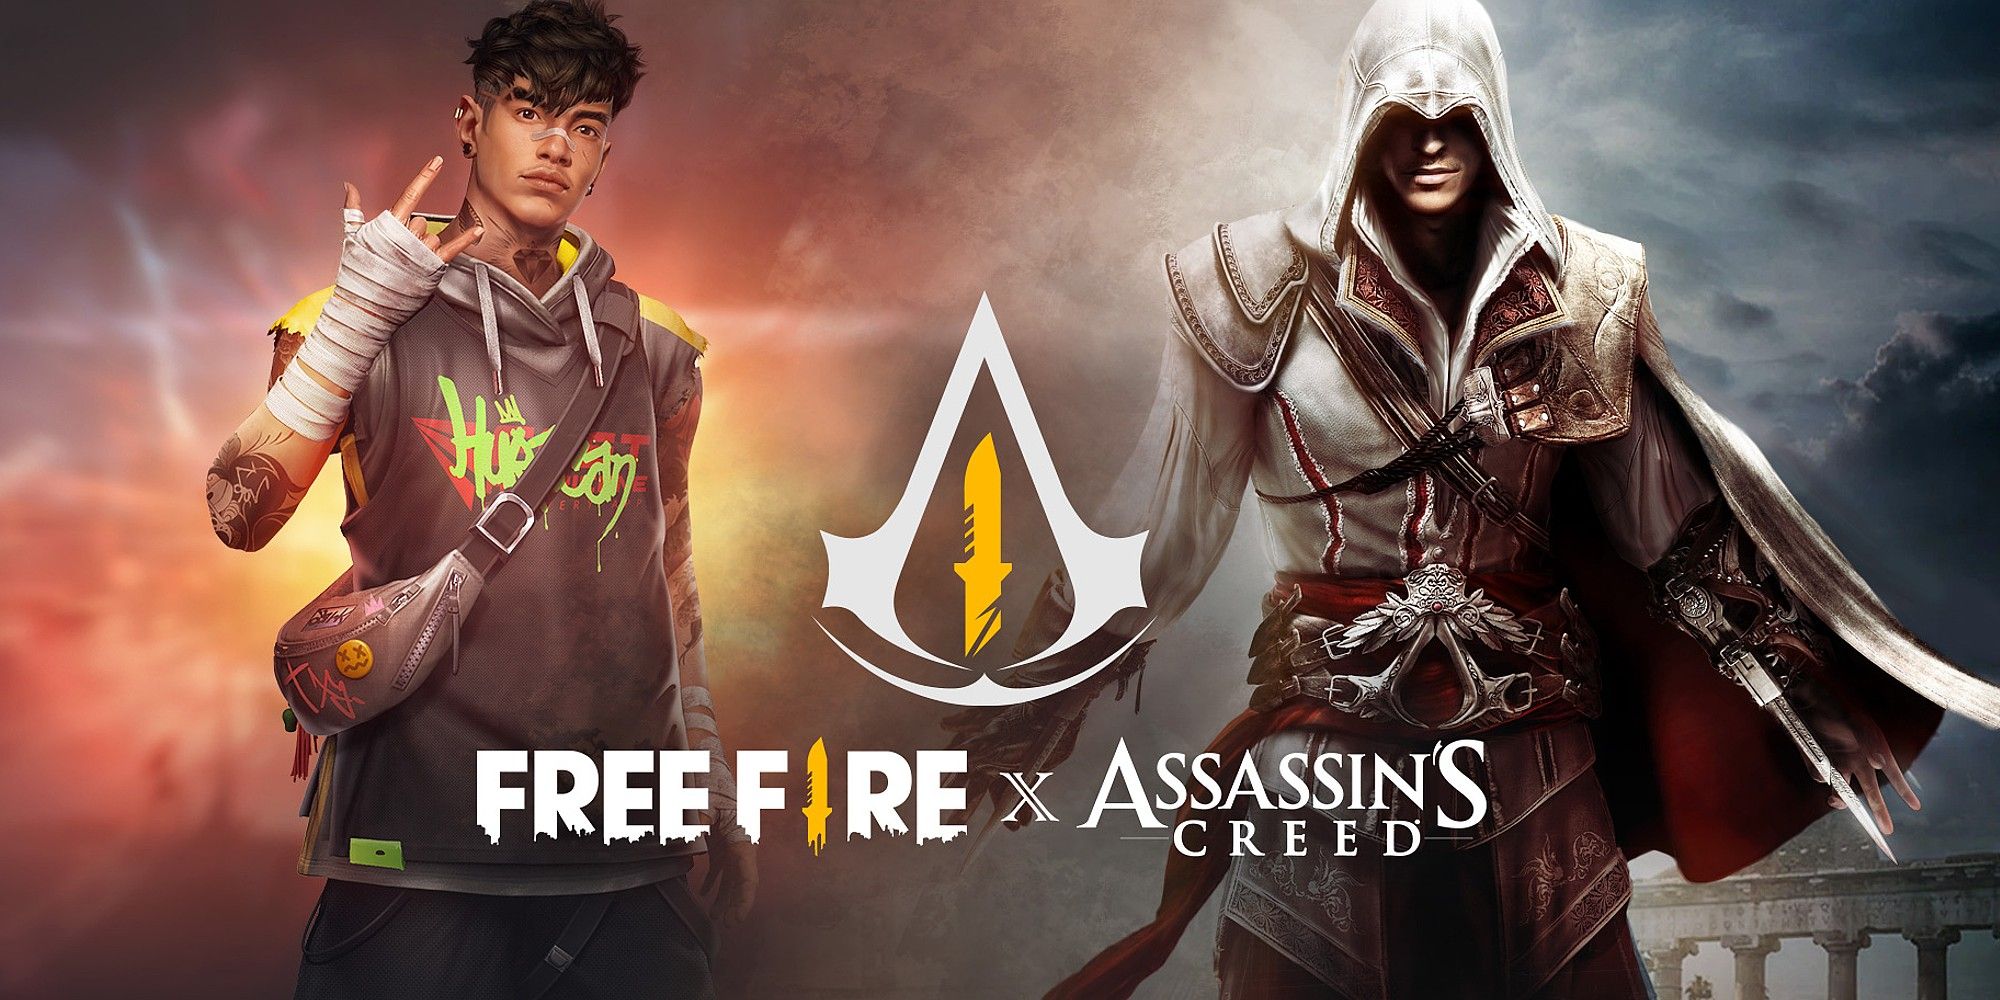 Assassin's Creed Leaps Into Free Fire In March